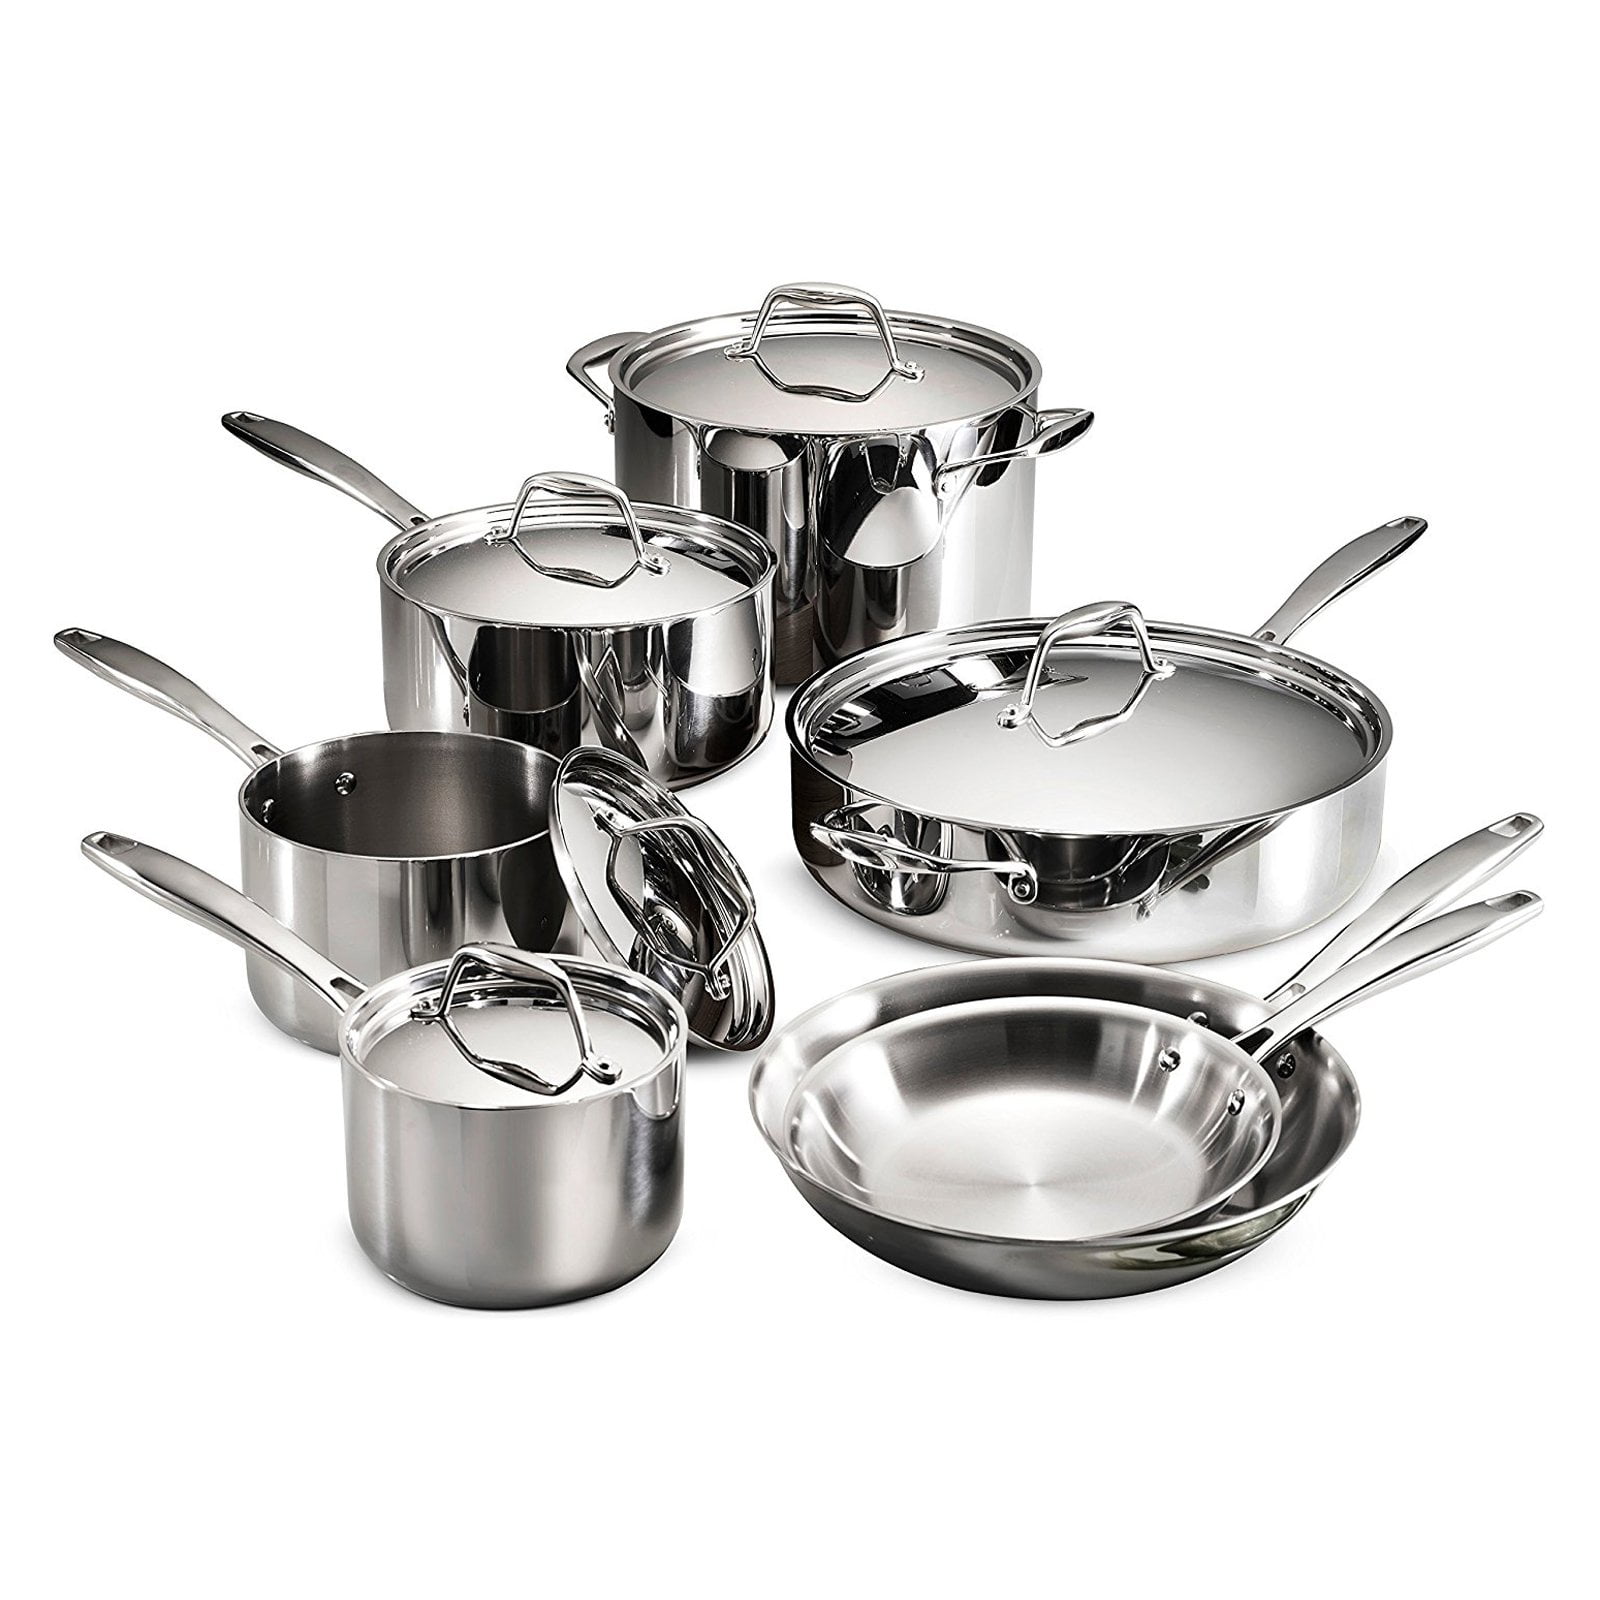 12 Piece NEW Tramontina Gourmet Stainless Steel Tri-Ply Base Cookware Set 